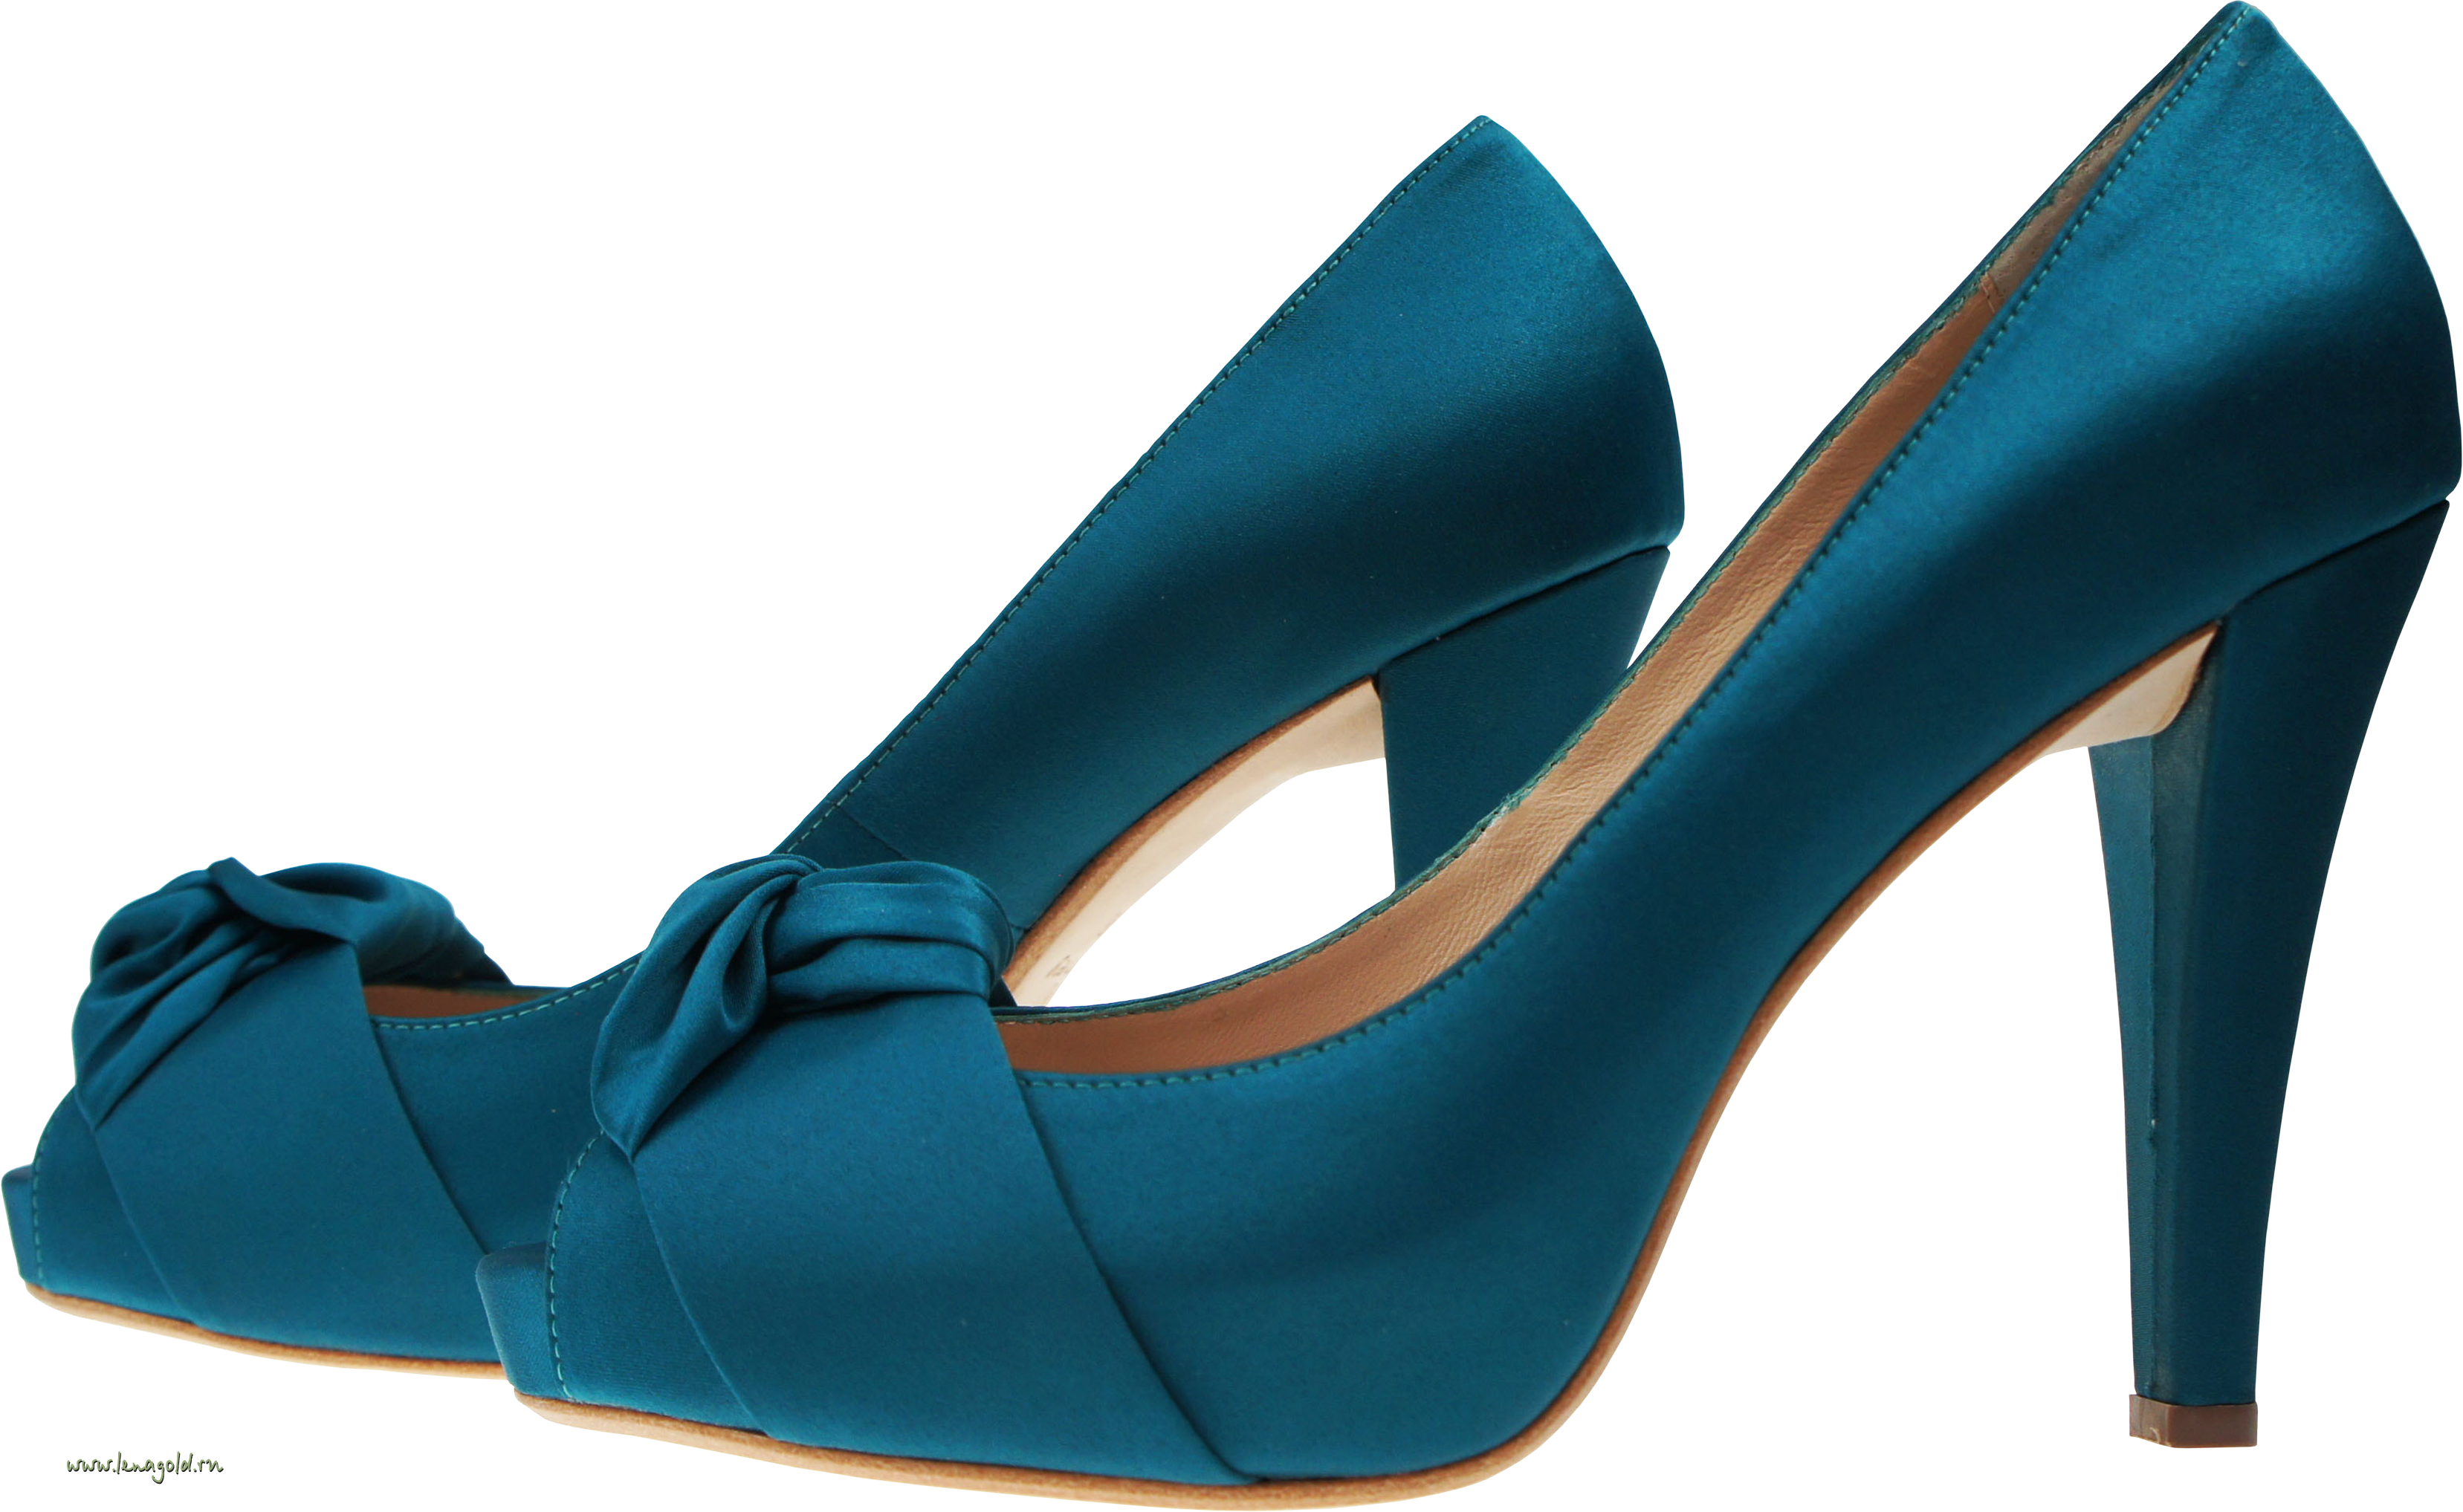 Chaussures femme bleues